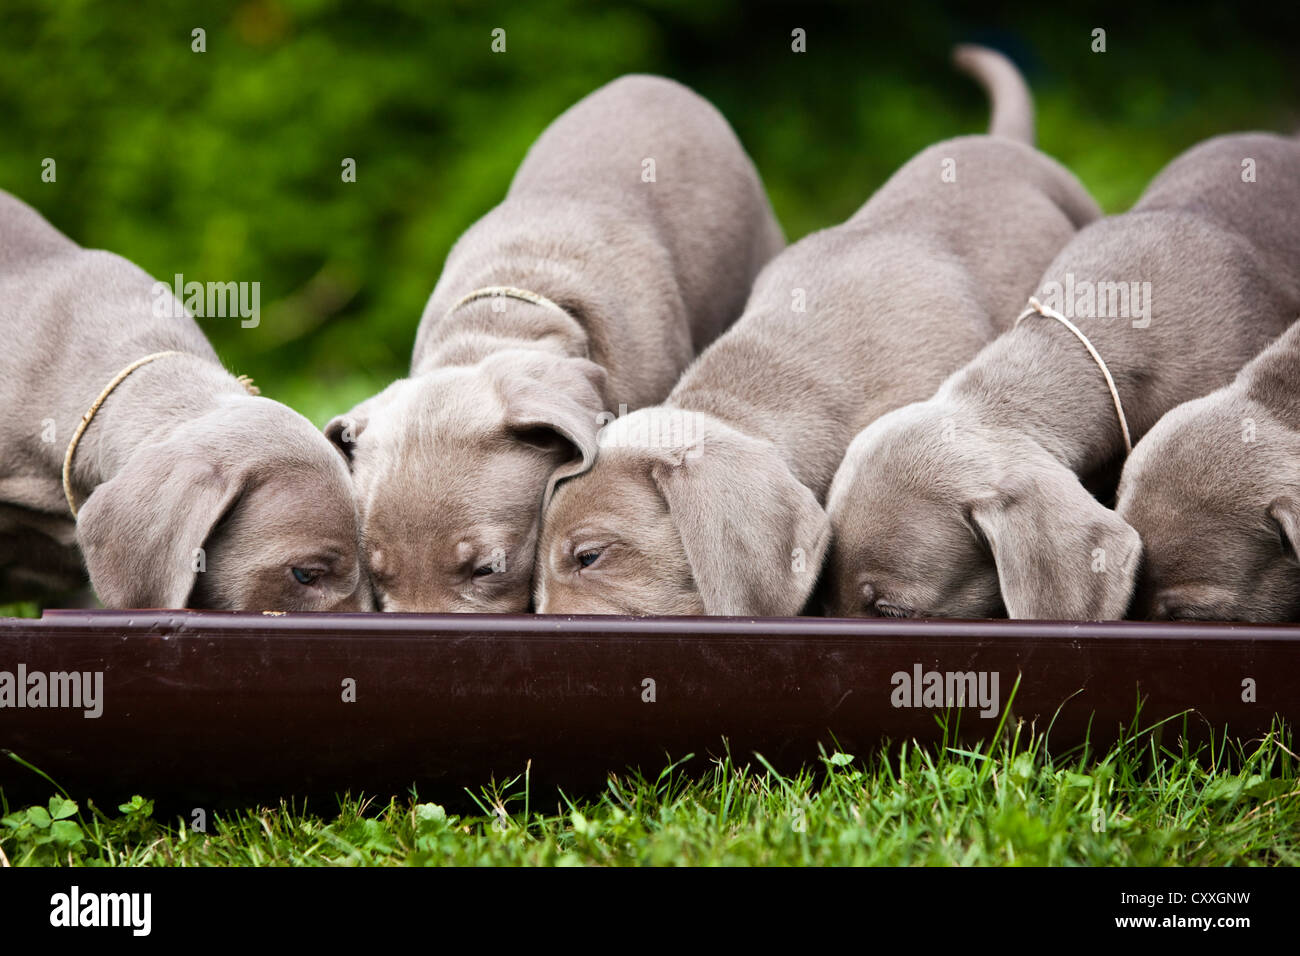 Weimaraner dogs, puppies, eating from a communal bowl, North Tyrol, Austria, Europe Stock Photo